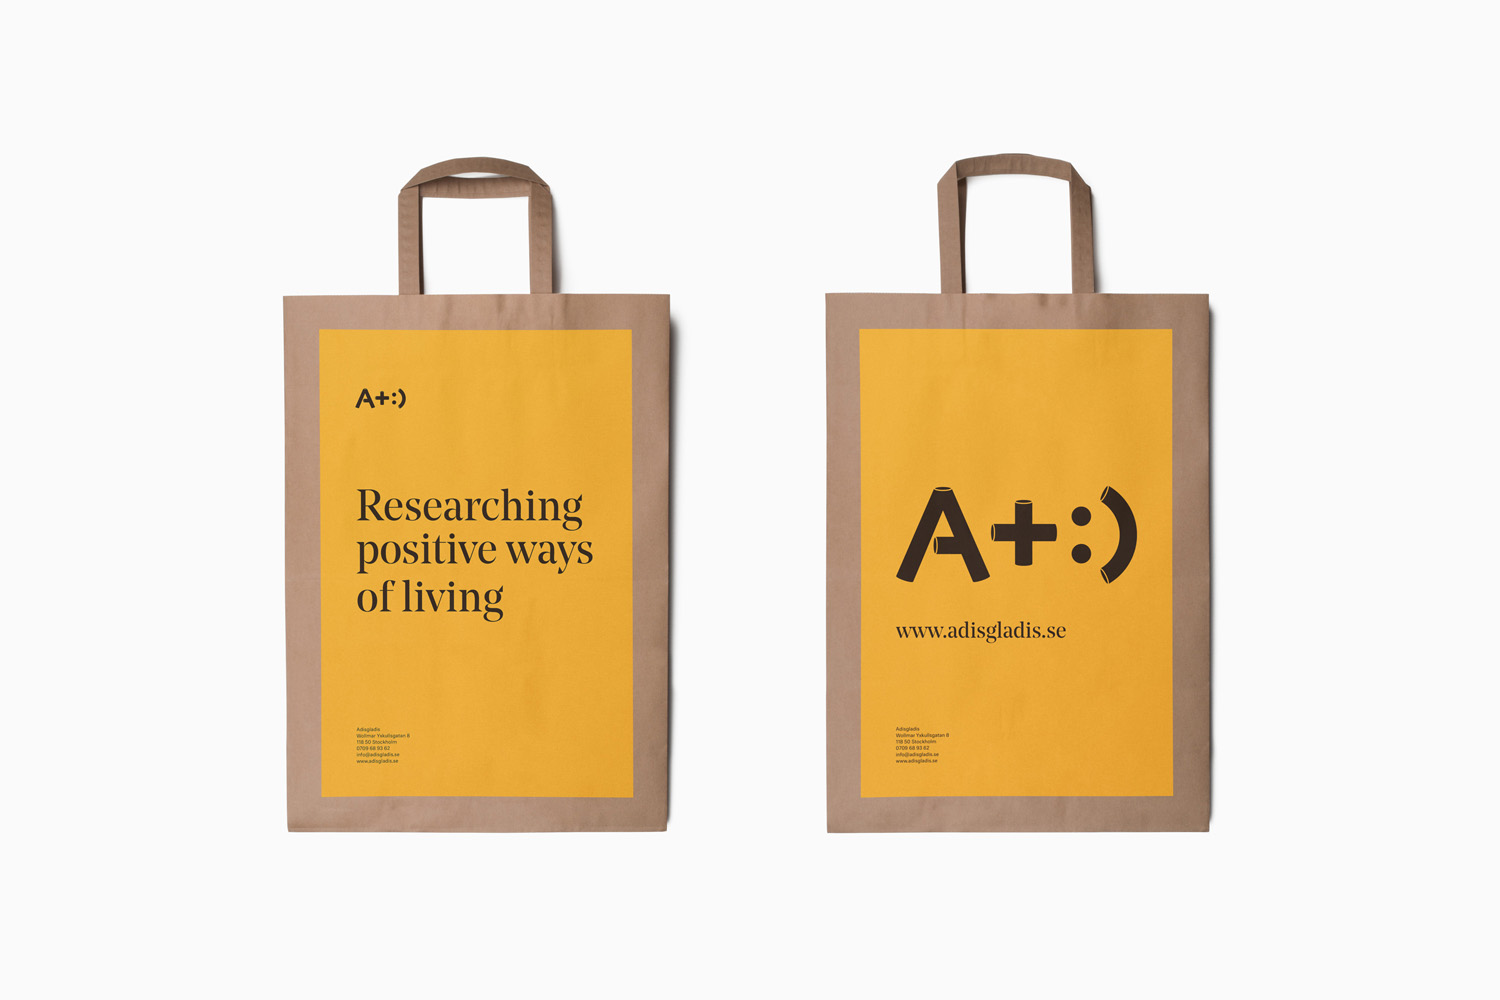 Brand identity and branded bags designed by Bedow for Swedish clothing and gadget retailer Adisgladis